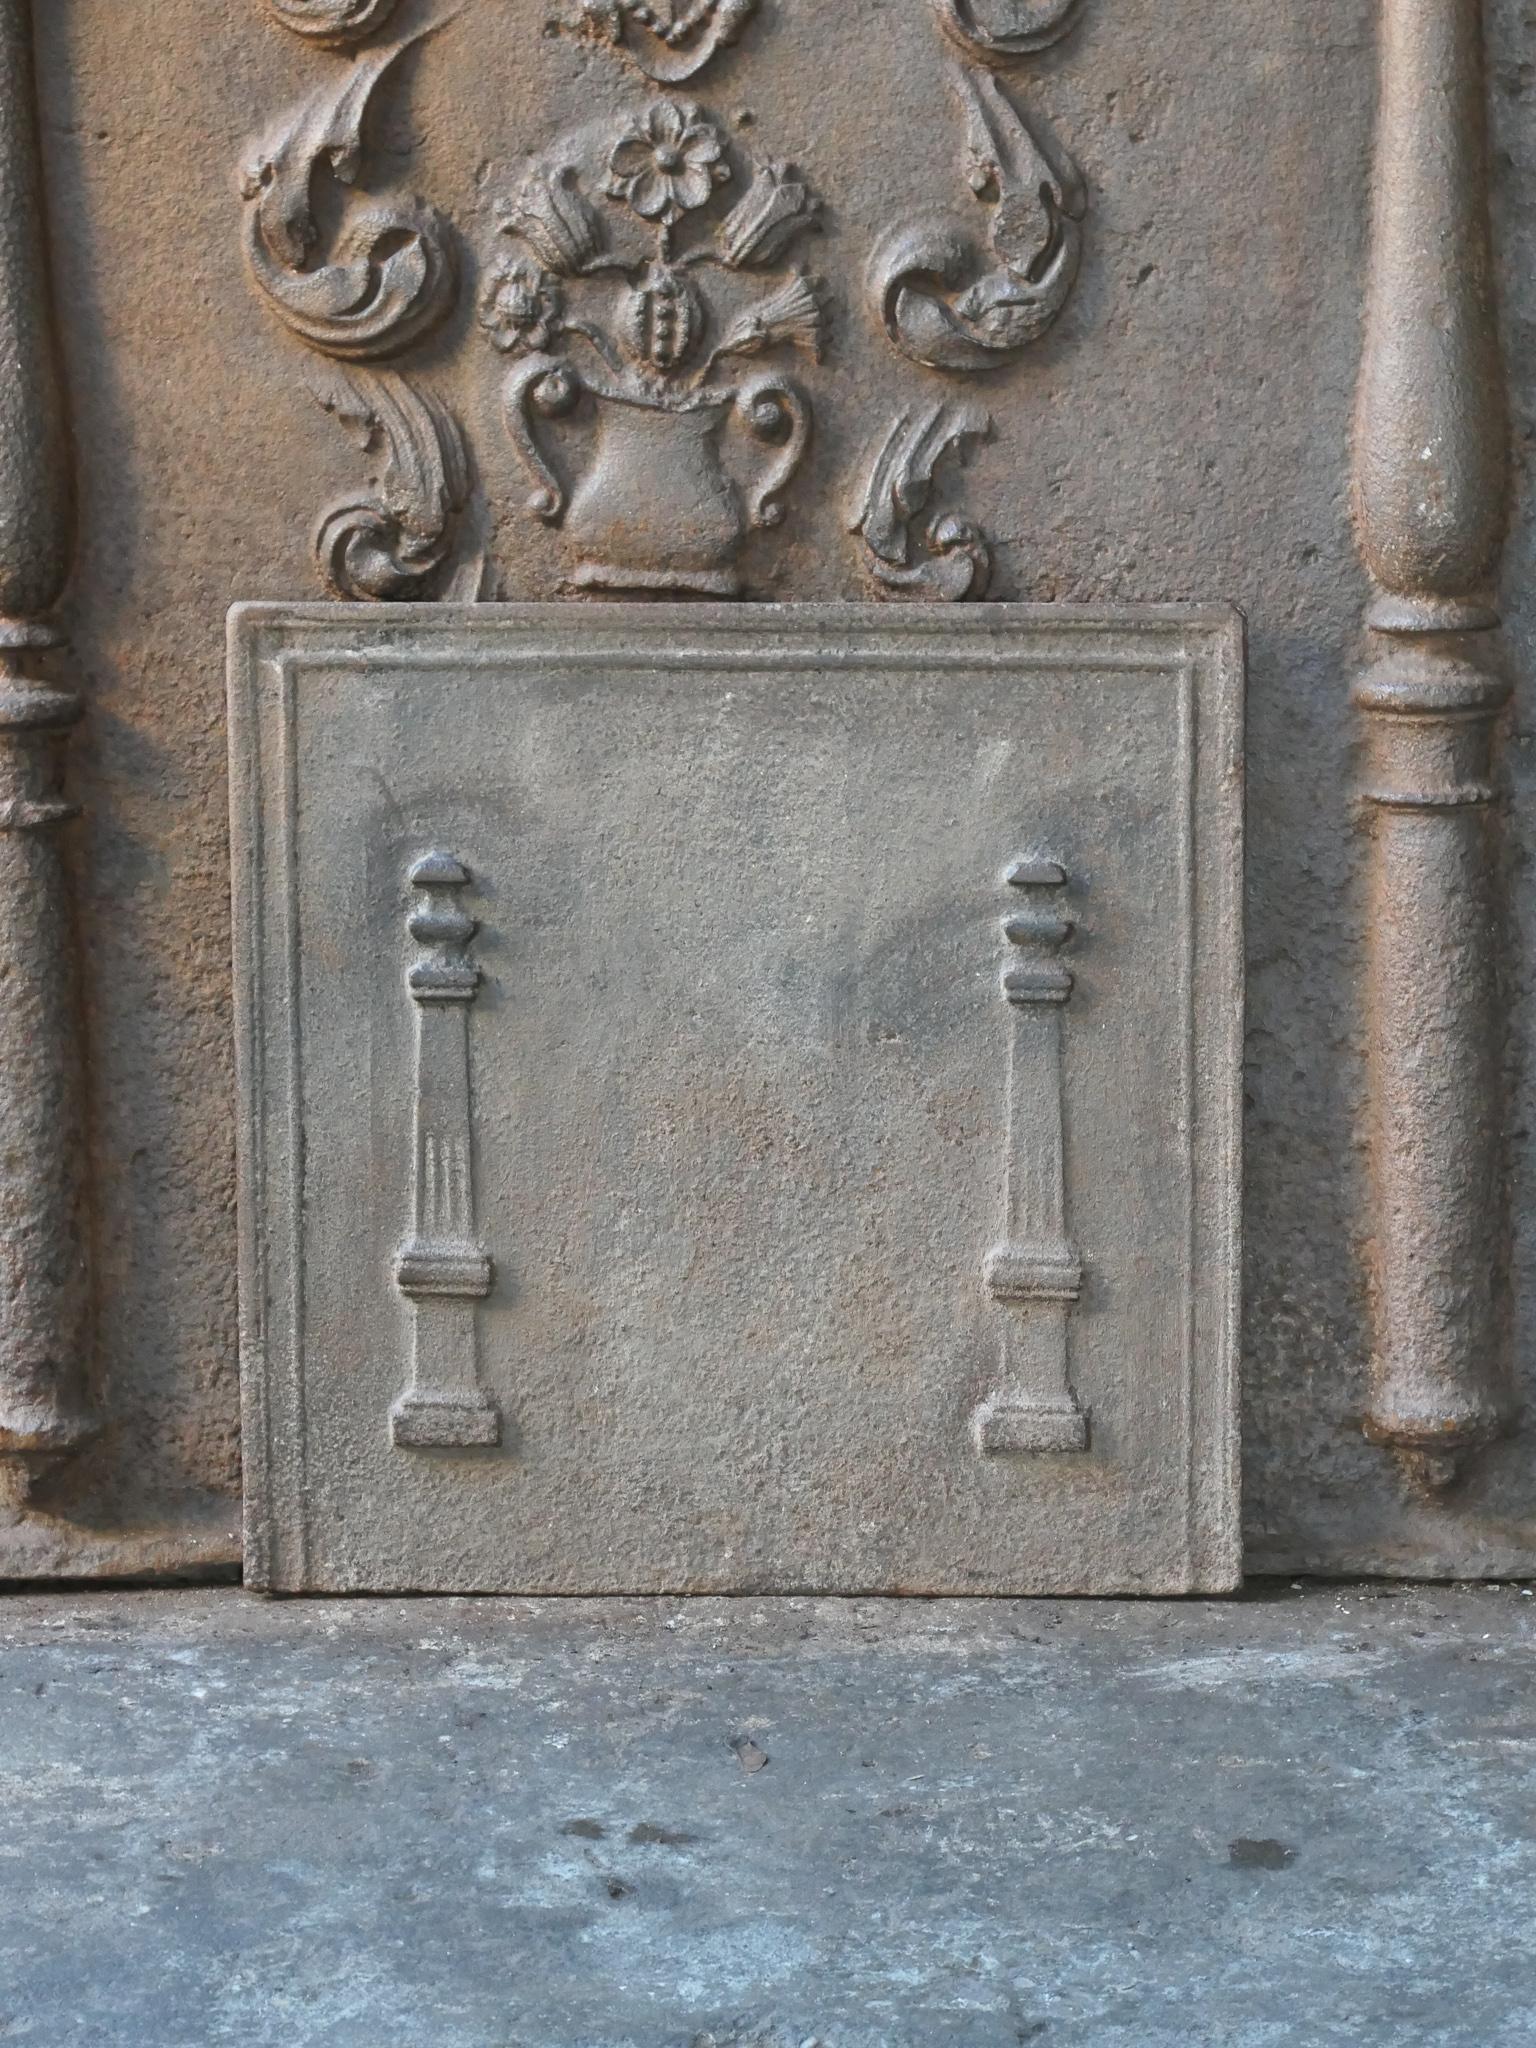 18th - 19th Century French neoclassical fireback with two pillars of freedom. The pillars symbolize the value liberty, one of the three values of the French revolution. 

The fireback is made of cast iron and has a brown patina. Upon request it